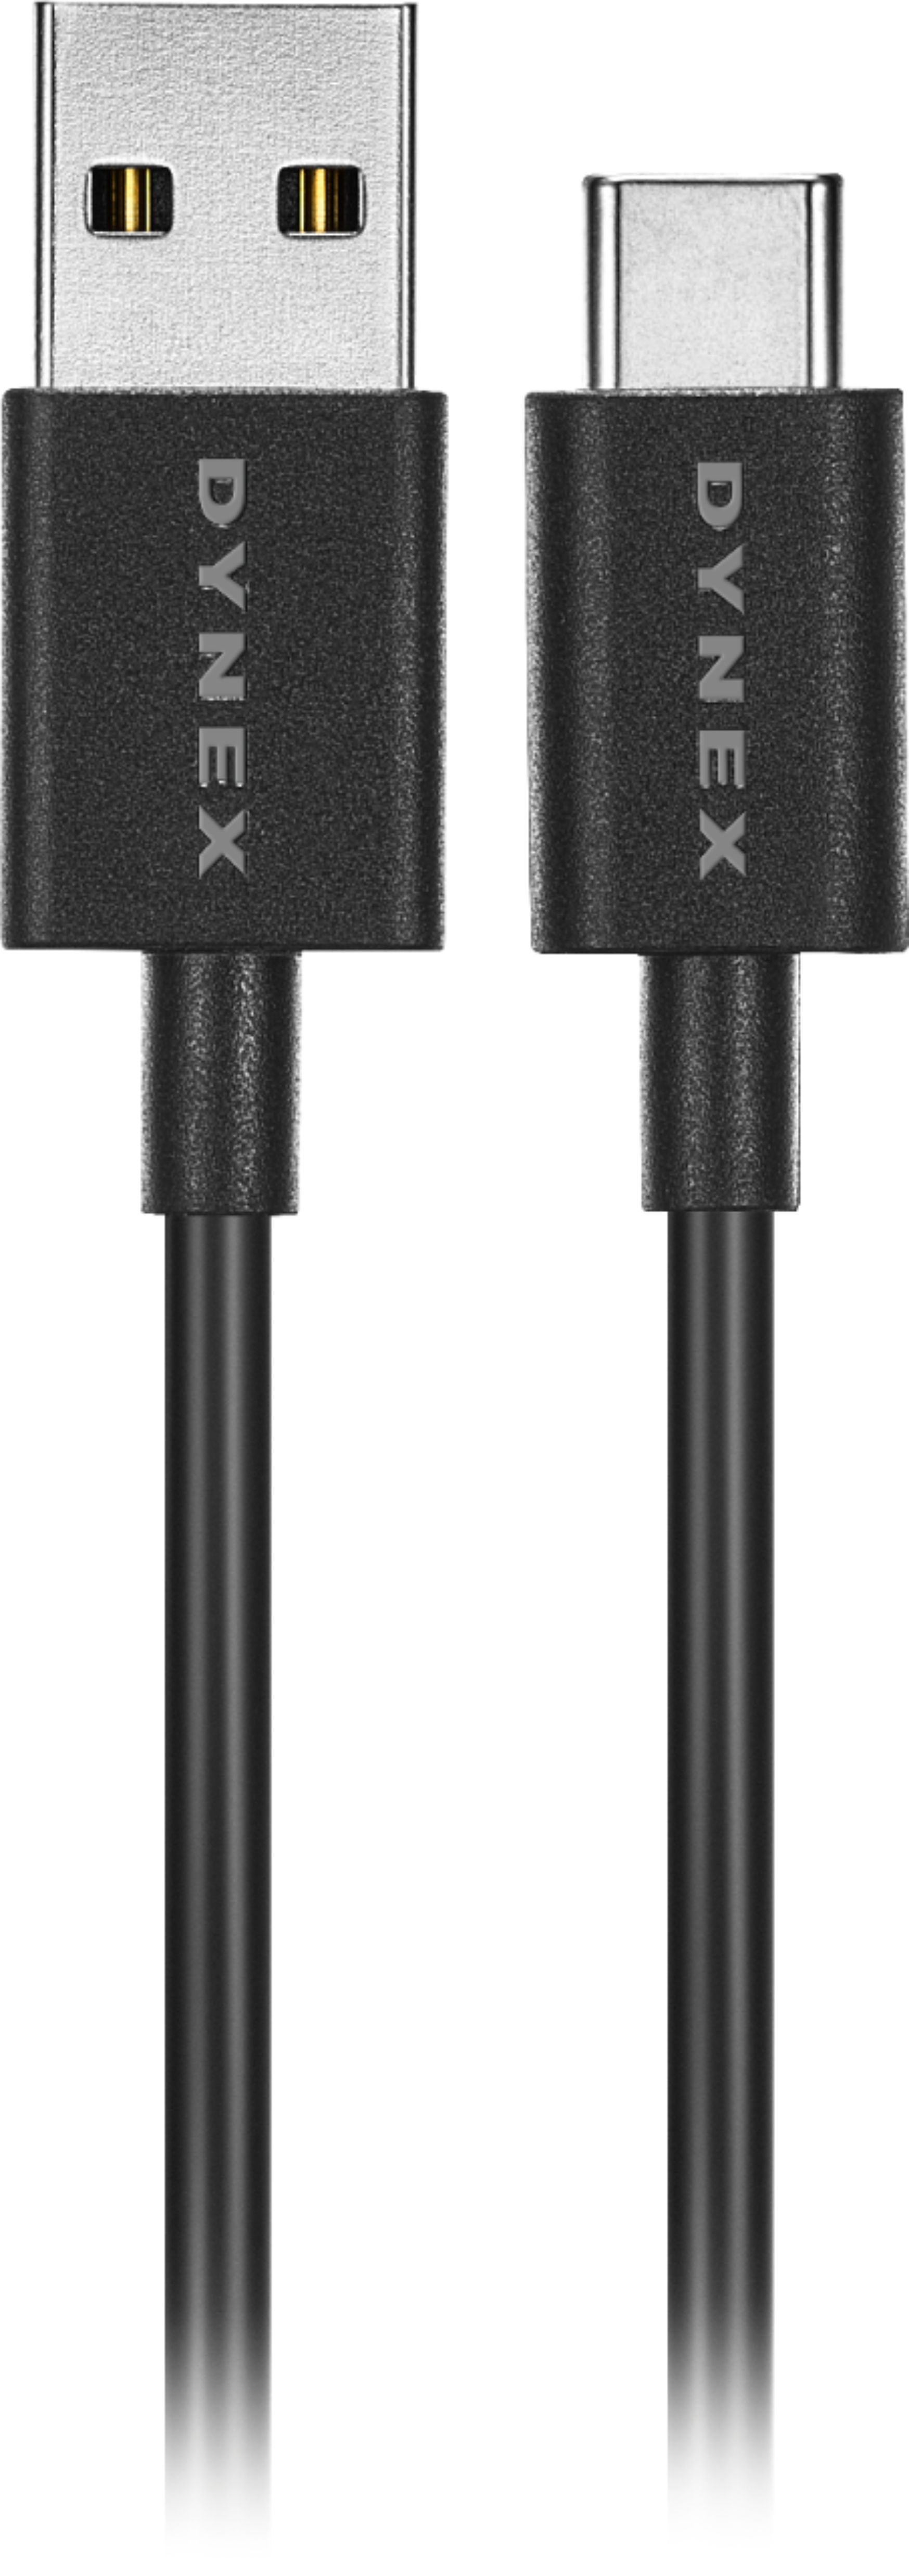 Floreren belegd broodje Emigreren Dynex™ 3' USB Type C-to-USB Type A Charge-and-Sync Cable (2-Pack) Black  DX-VCA322K2 - Best Buy